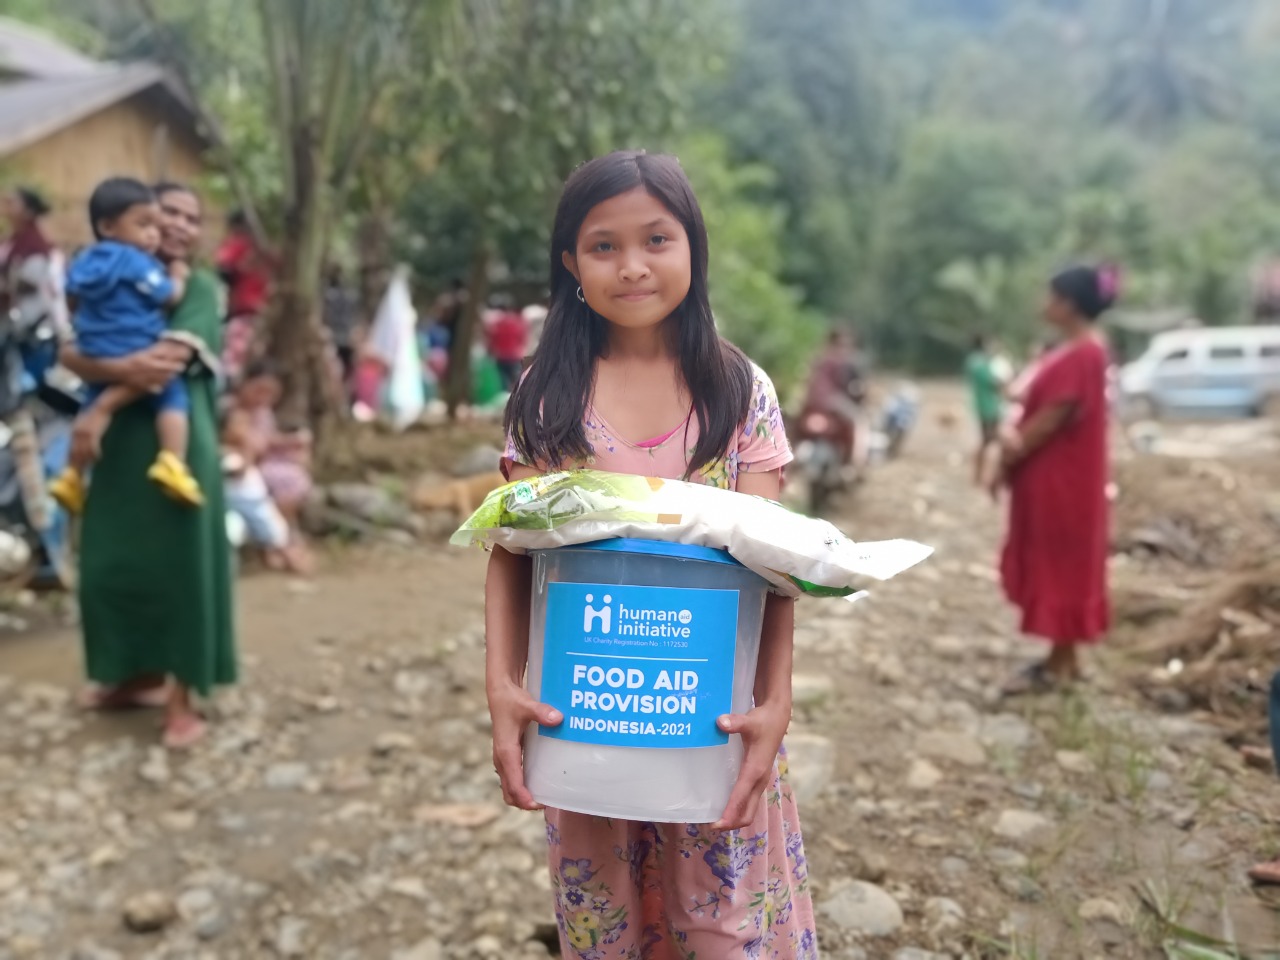 Girl in Indonesia holding food aid provision